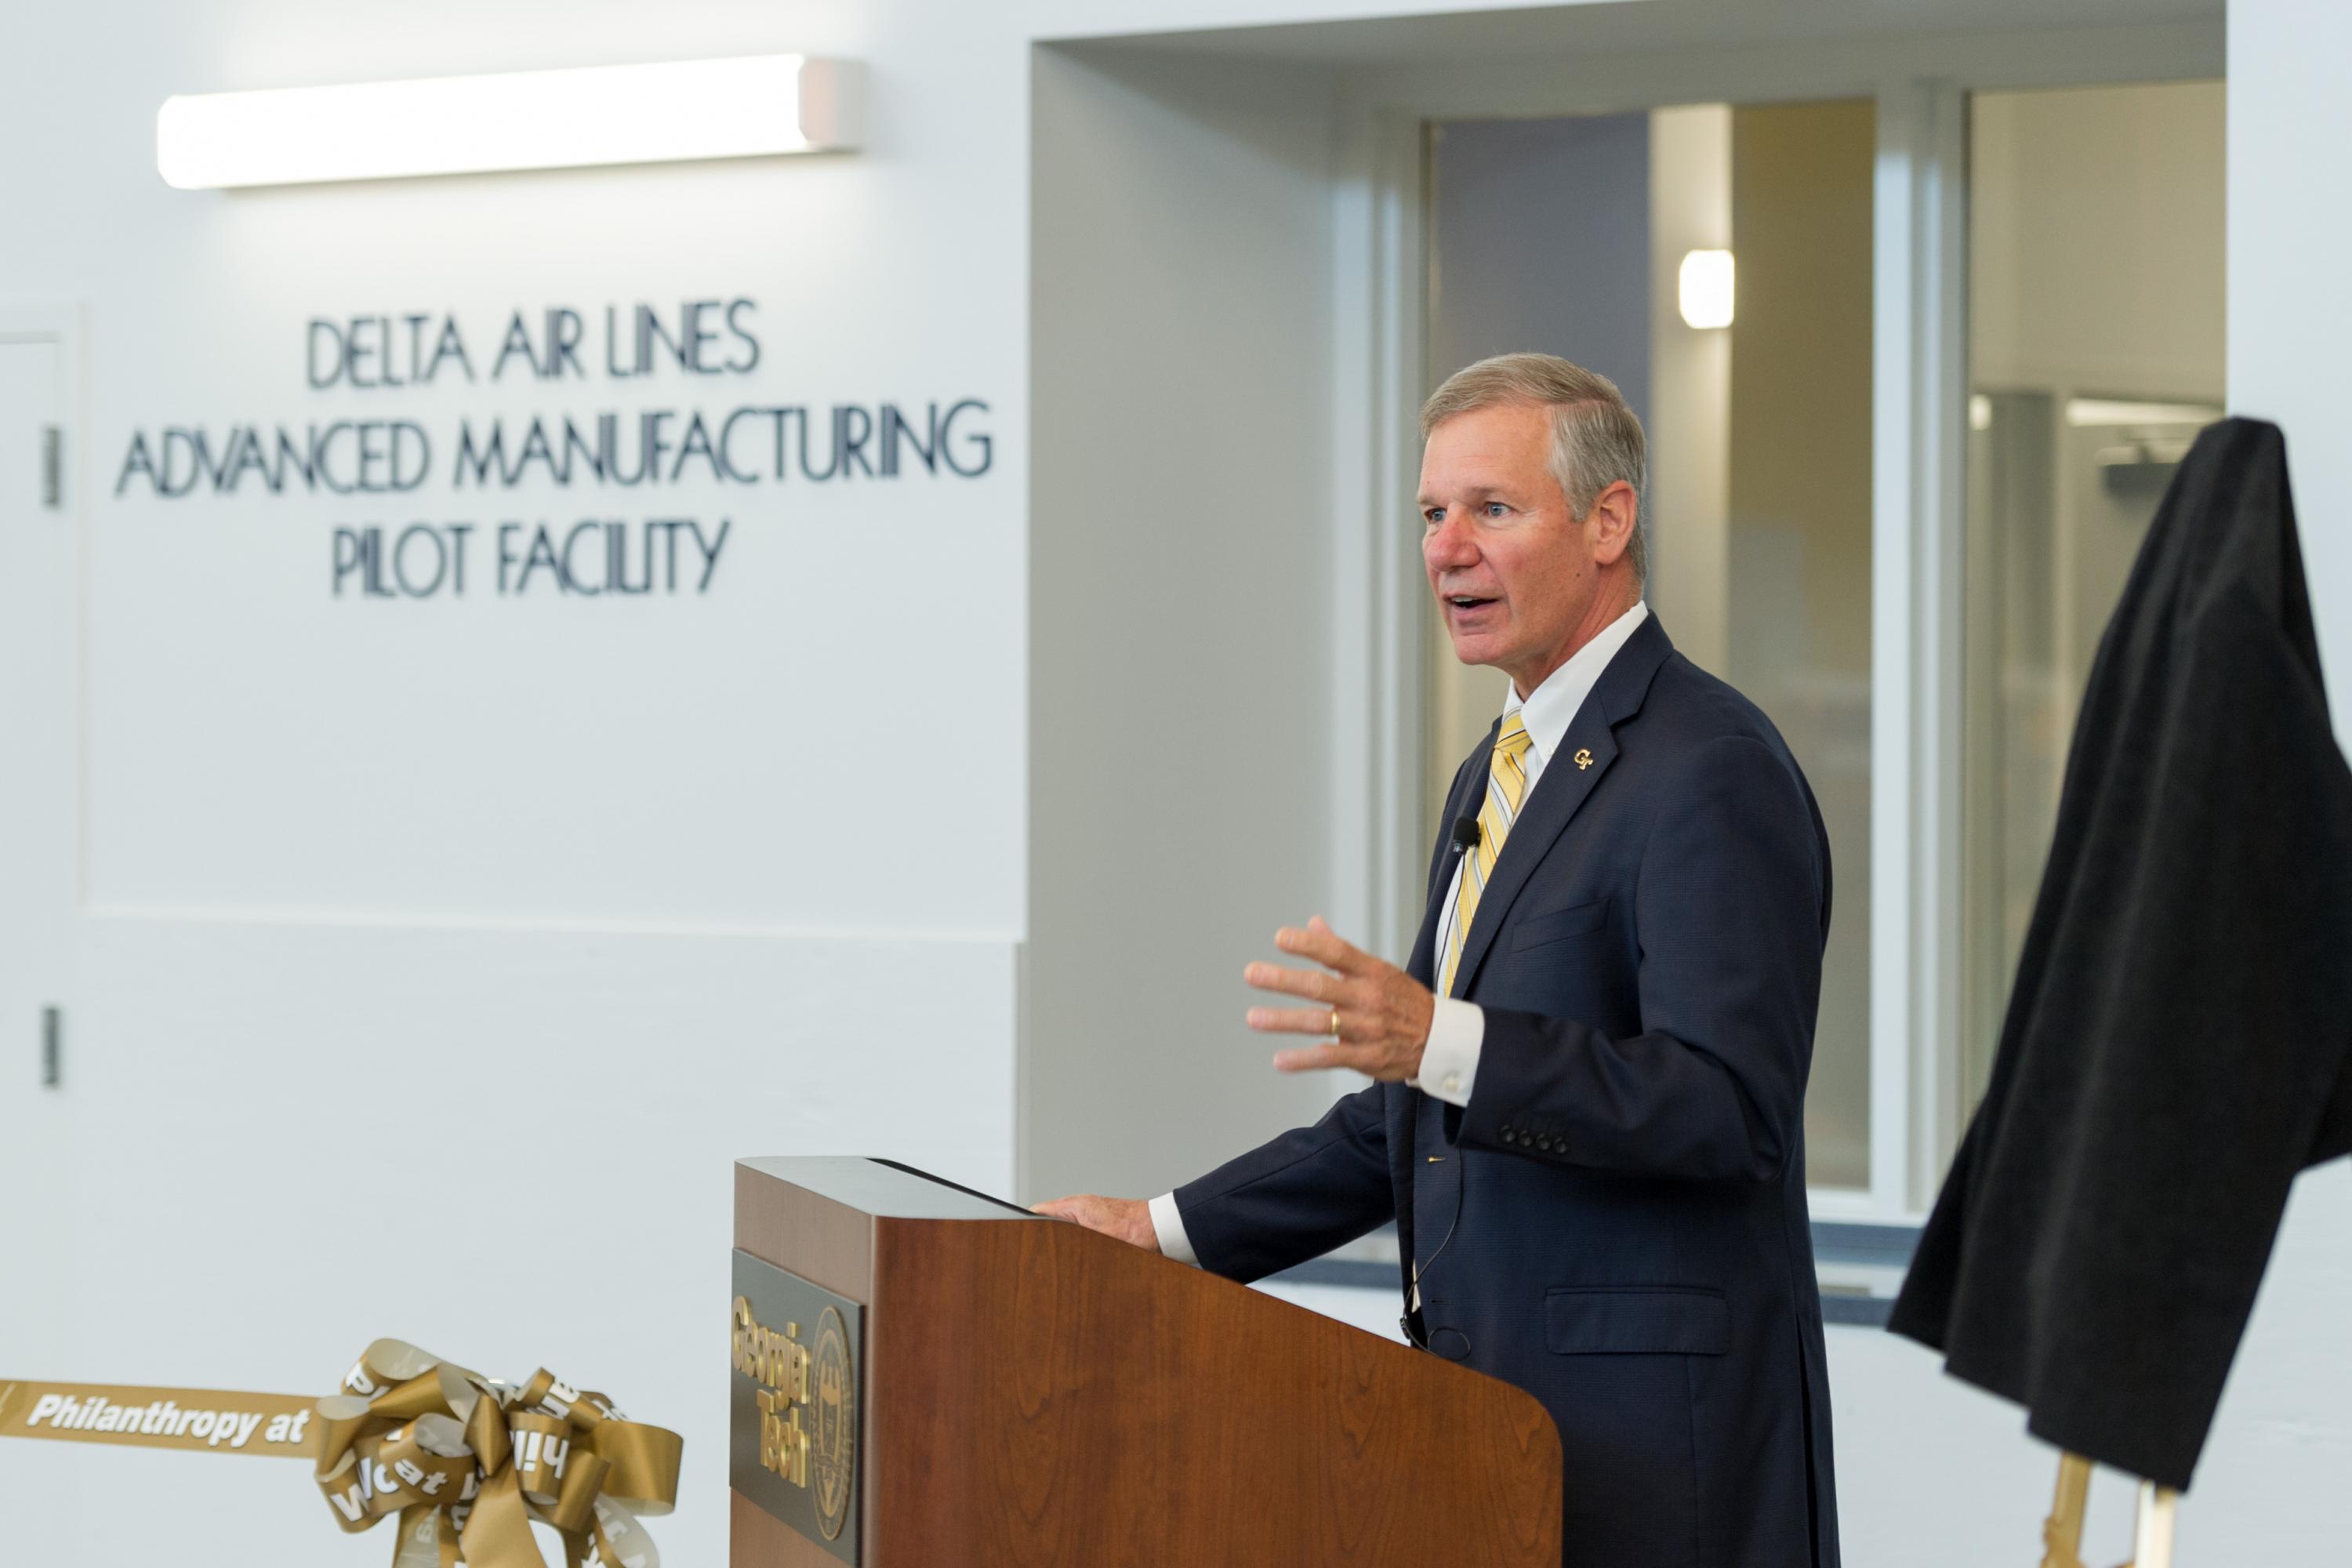 Georgia Tech President G.P. “Bud” Peterson highlights the growing partnership with Delta Air Lines July 19 during the ribbon cutting for Delta’s new Advanced Manufacturing Pilot Facility on Georgia Tech’s campus.